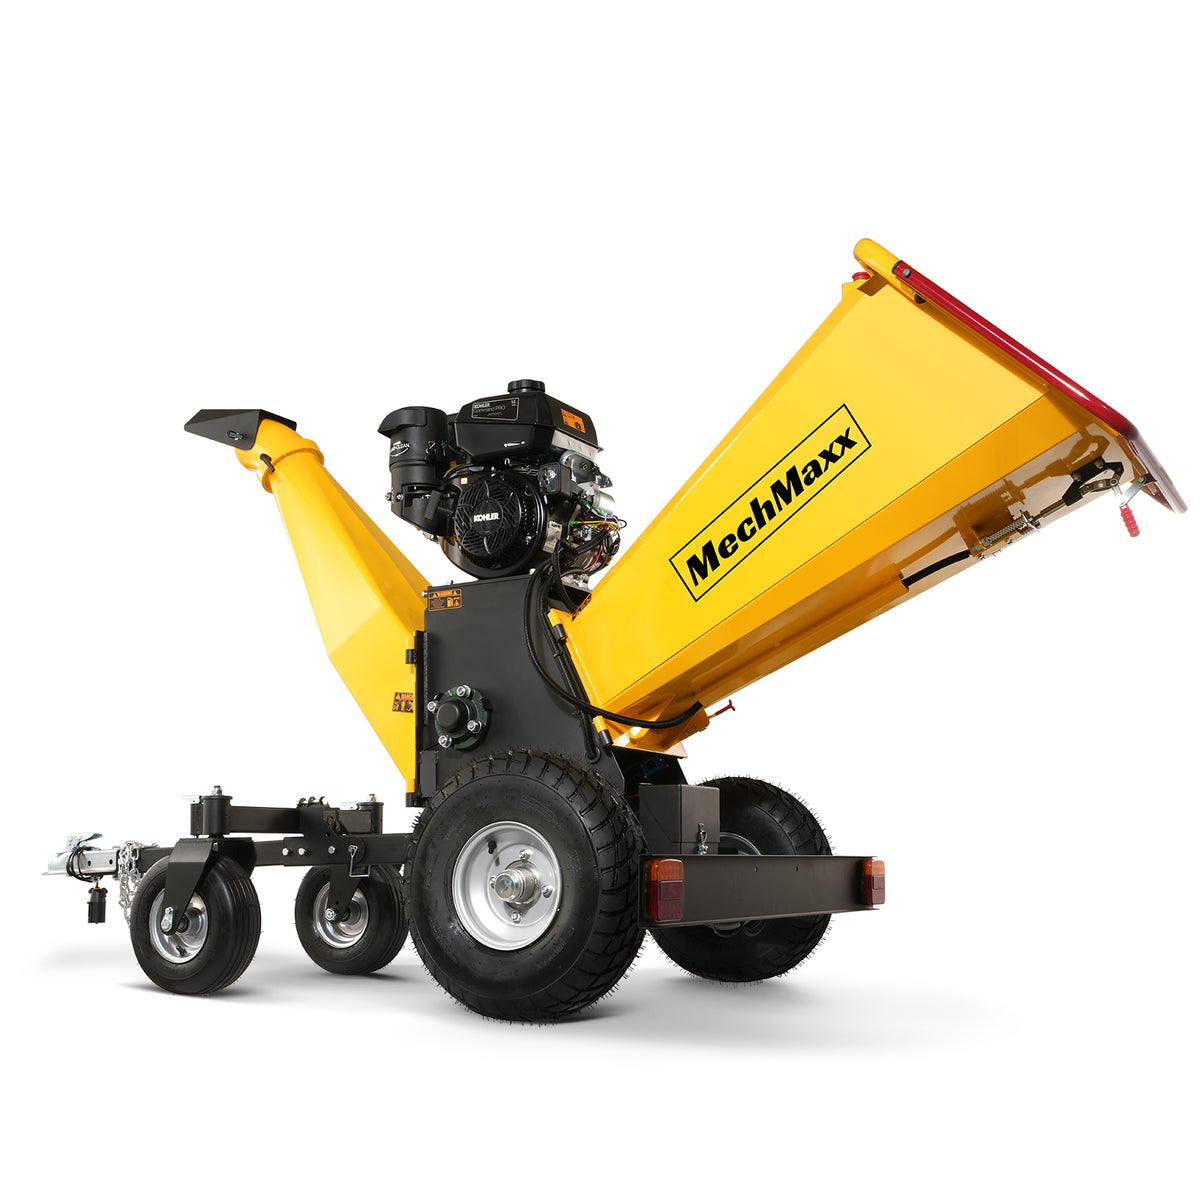 6 inch E-start KOHLER 429cc 14hp Gas Powered 4 - Wheel Drum Wood Chipper with Taillight , B150